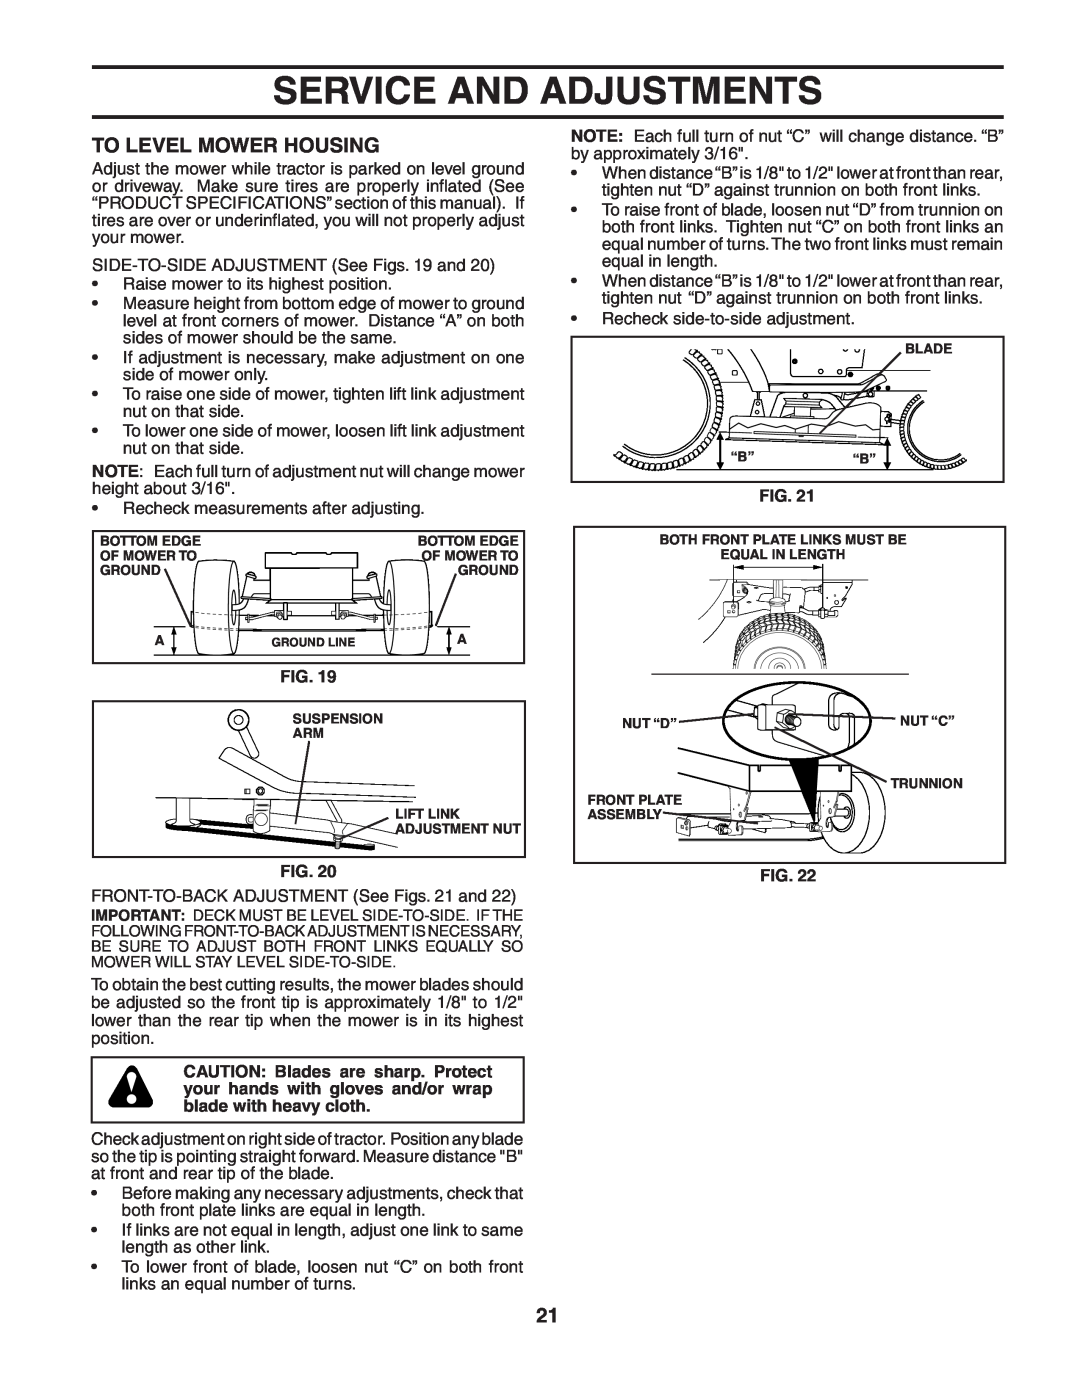 Husqvarna YTH2248 owner manual To Level Mower Housing, Service And Adjustments 